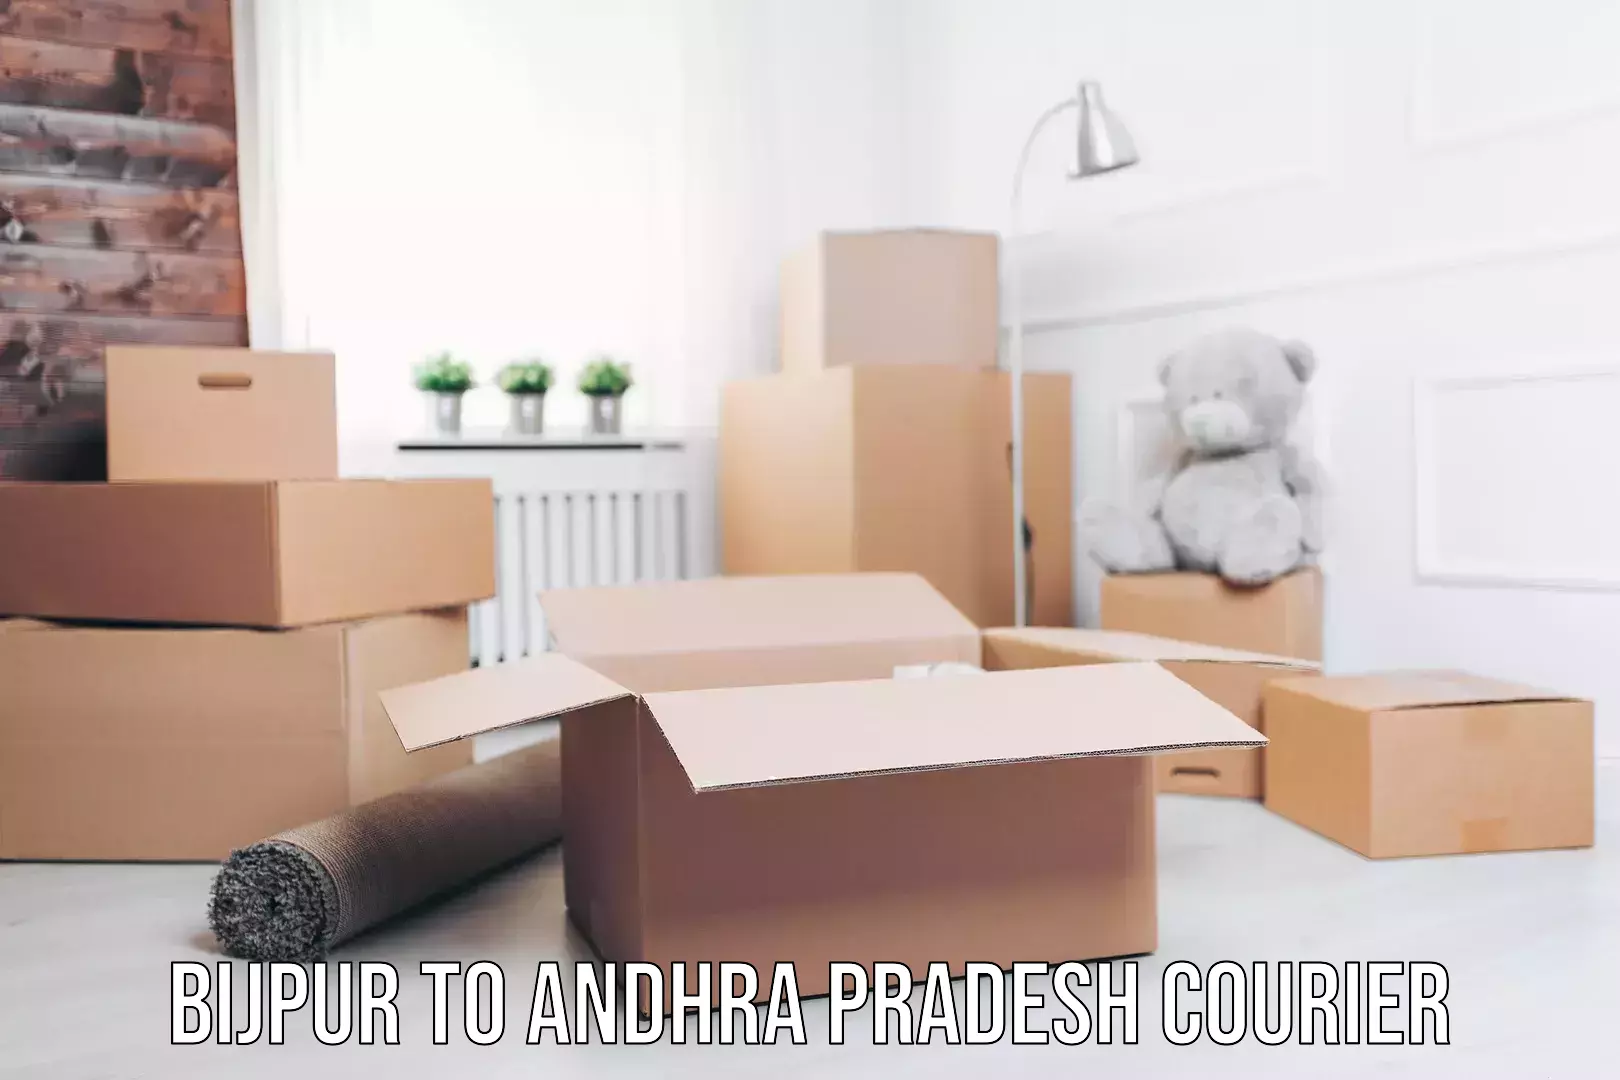 Reliable delivery network Bijpur to Andhra Pradesh